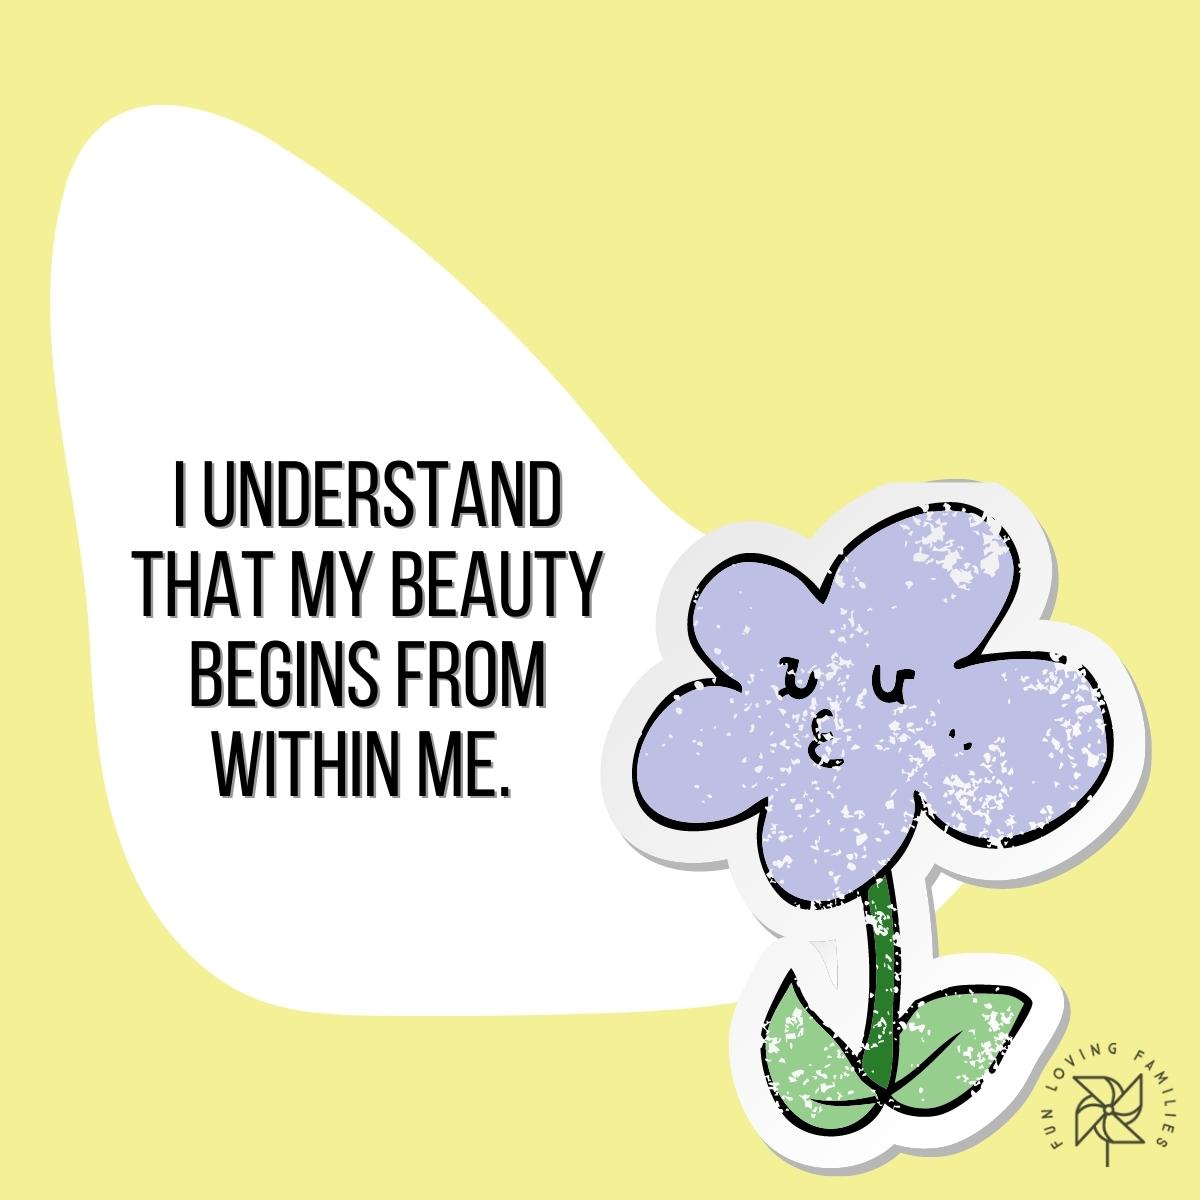 I understand that my beauty begins from within me affirmation